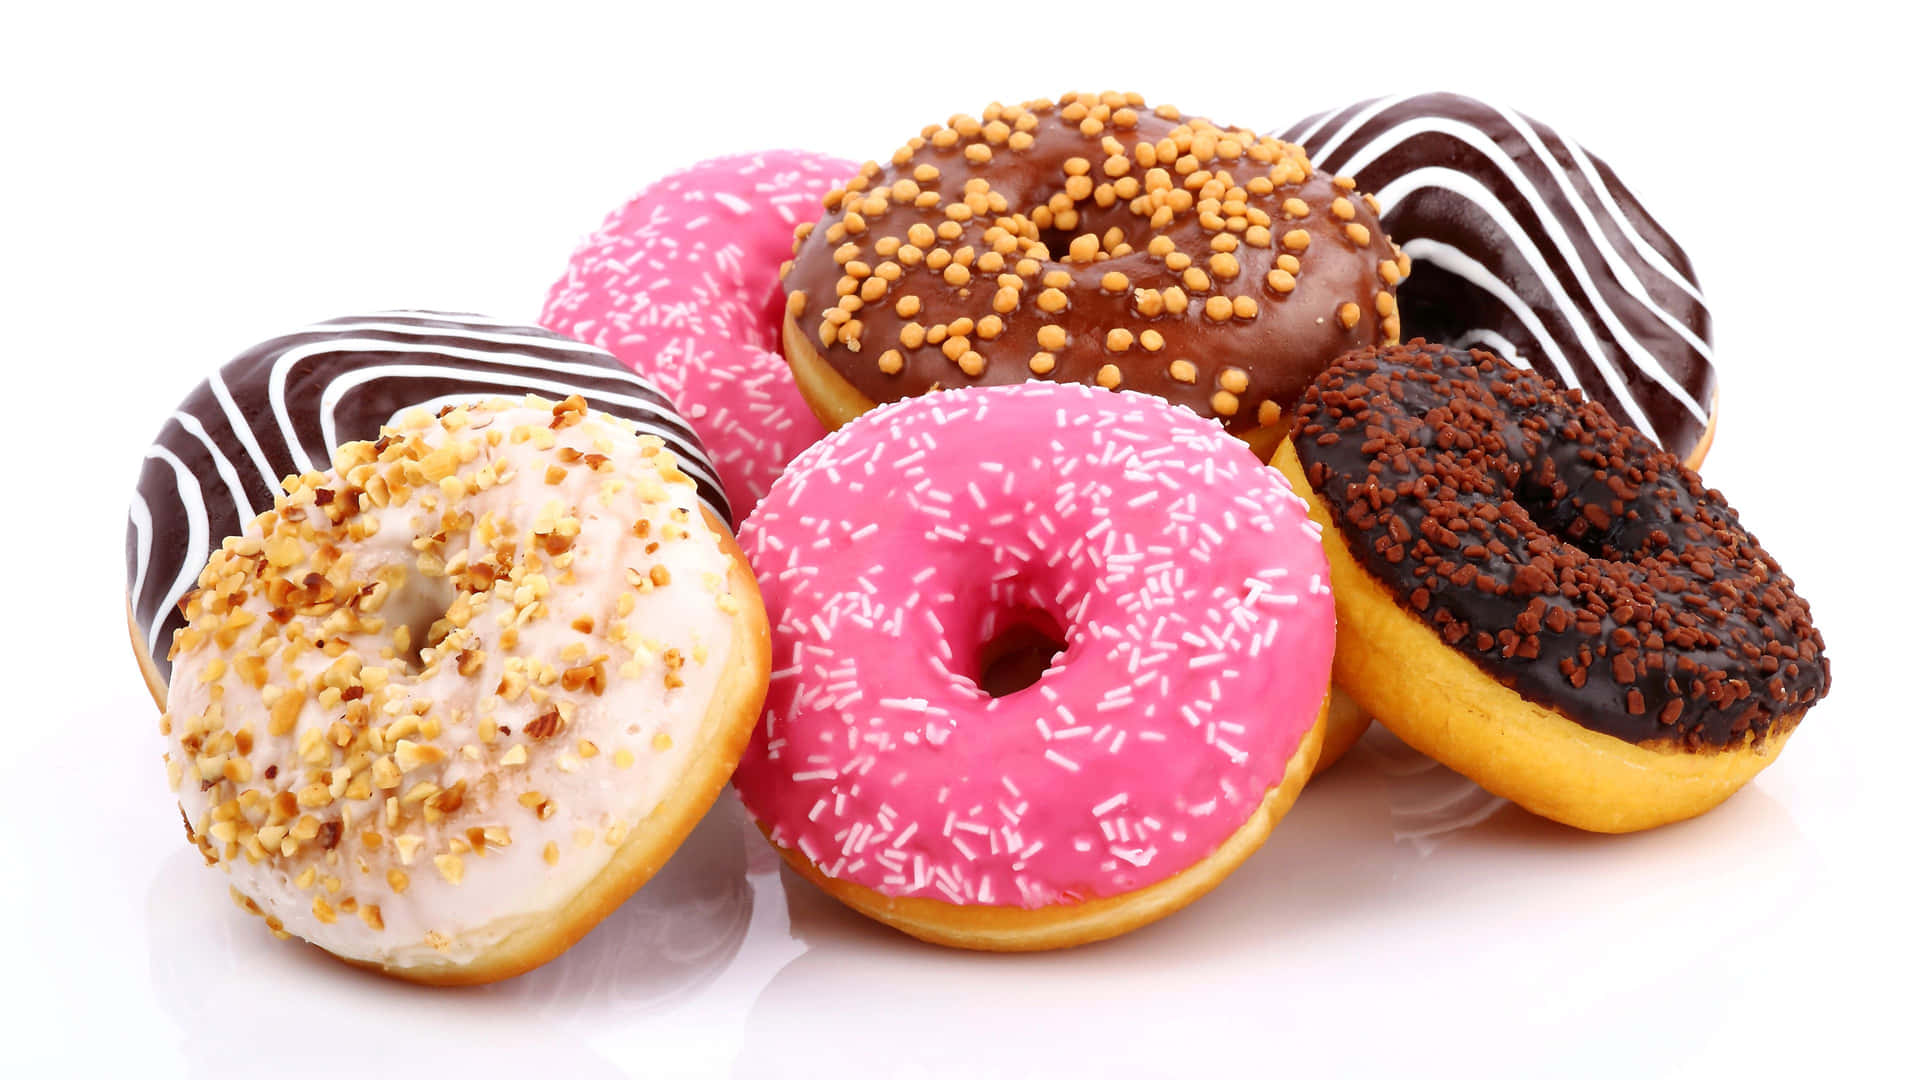 Get your weekend started with Dunkin Donuts!